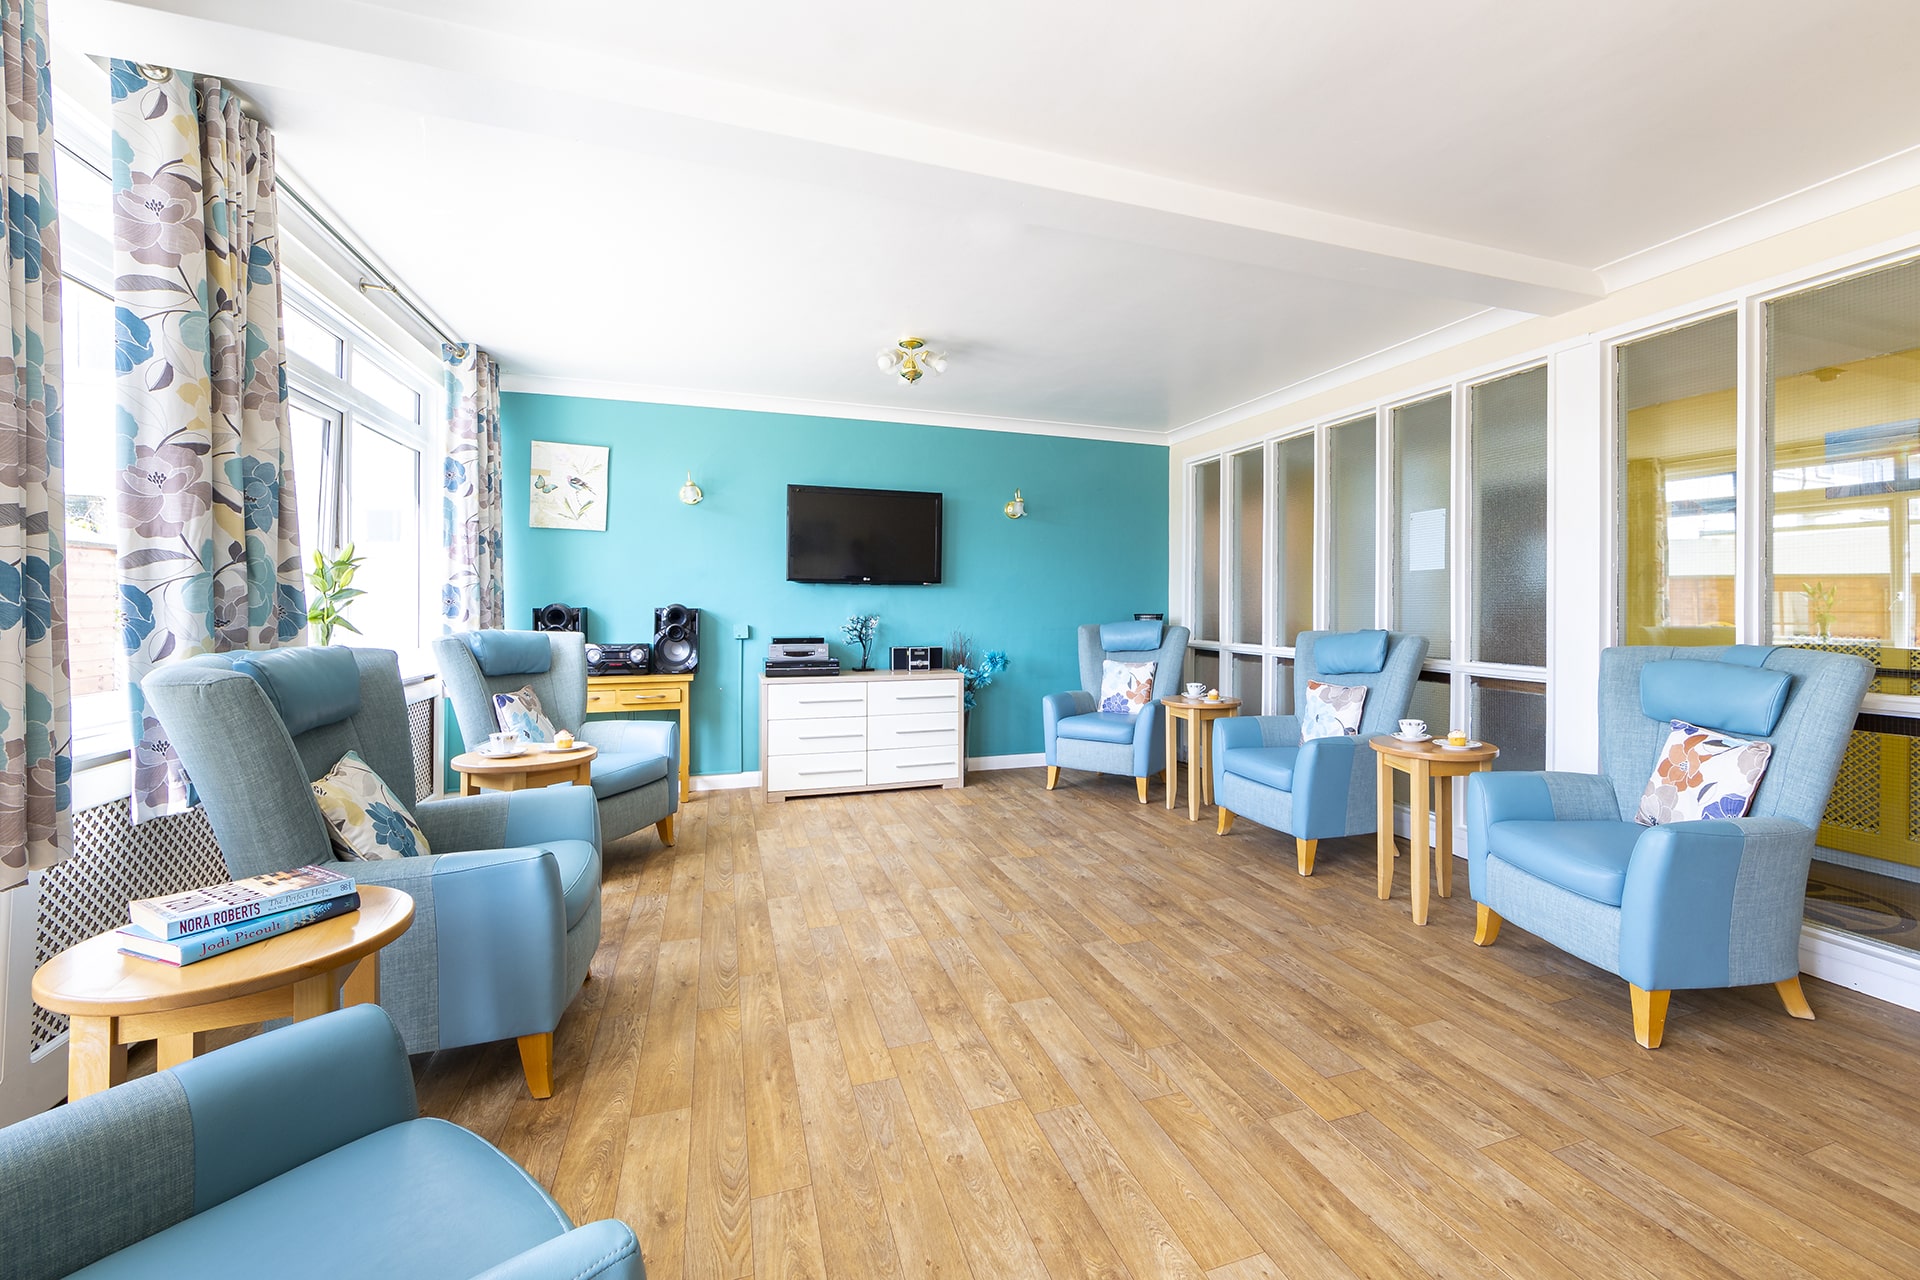 Main lounge at Cavell House Care Home in Shoreham-by-Sea.